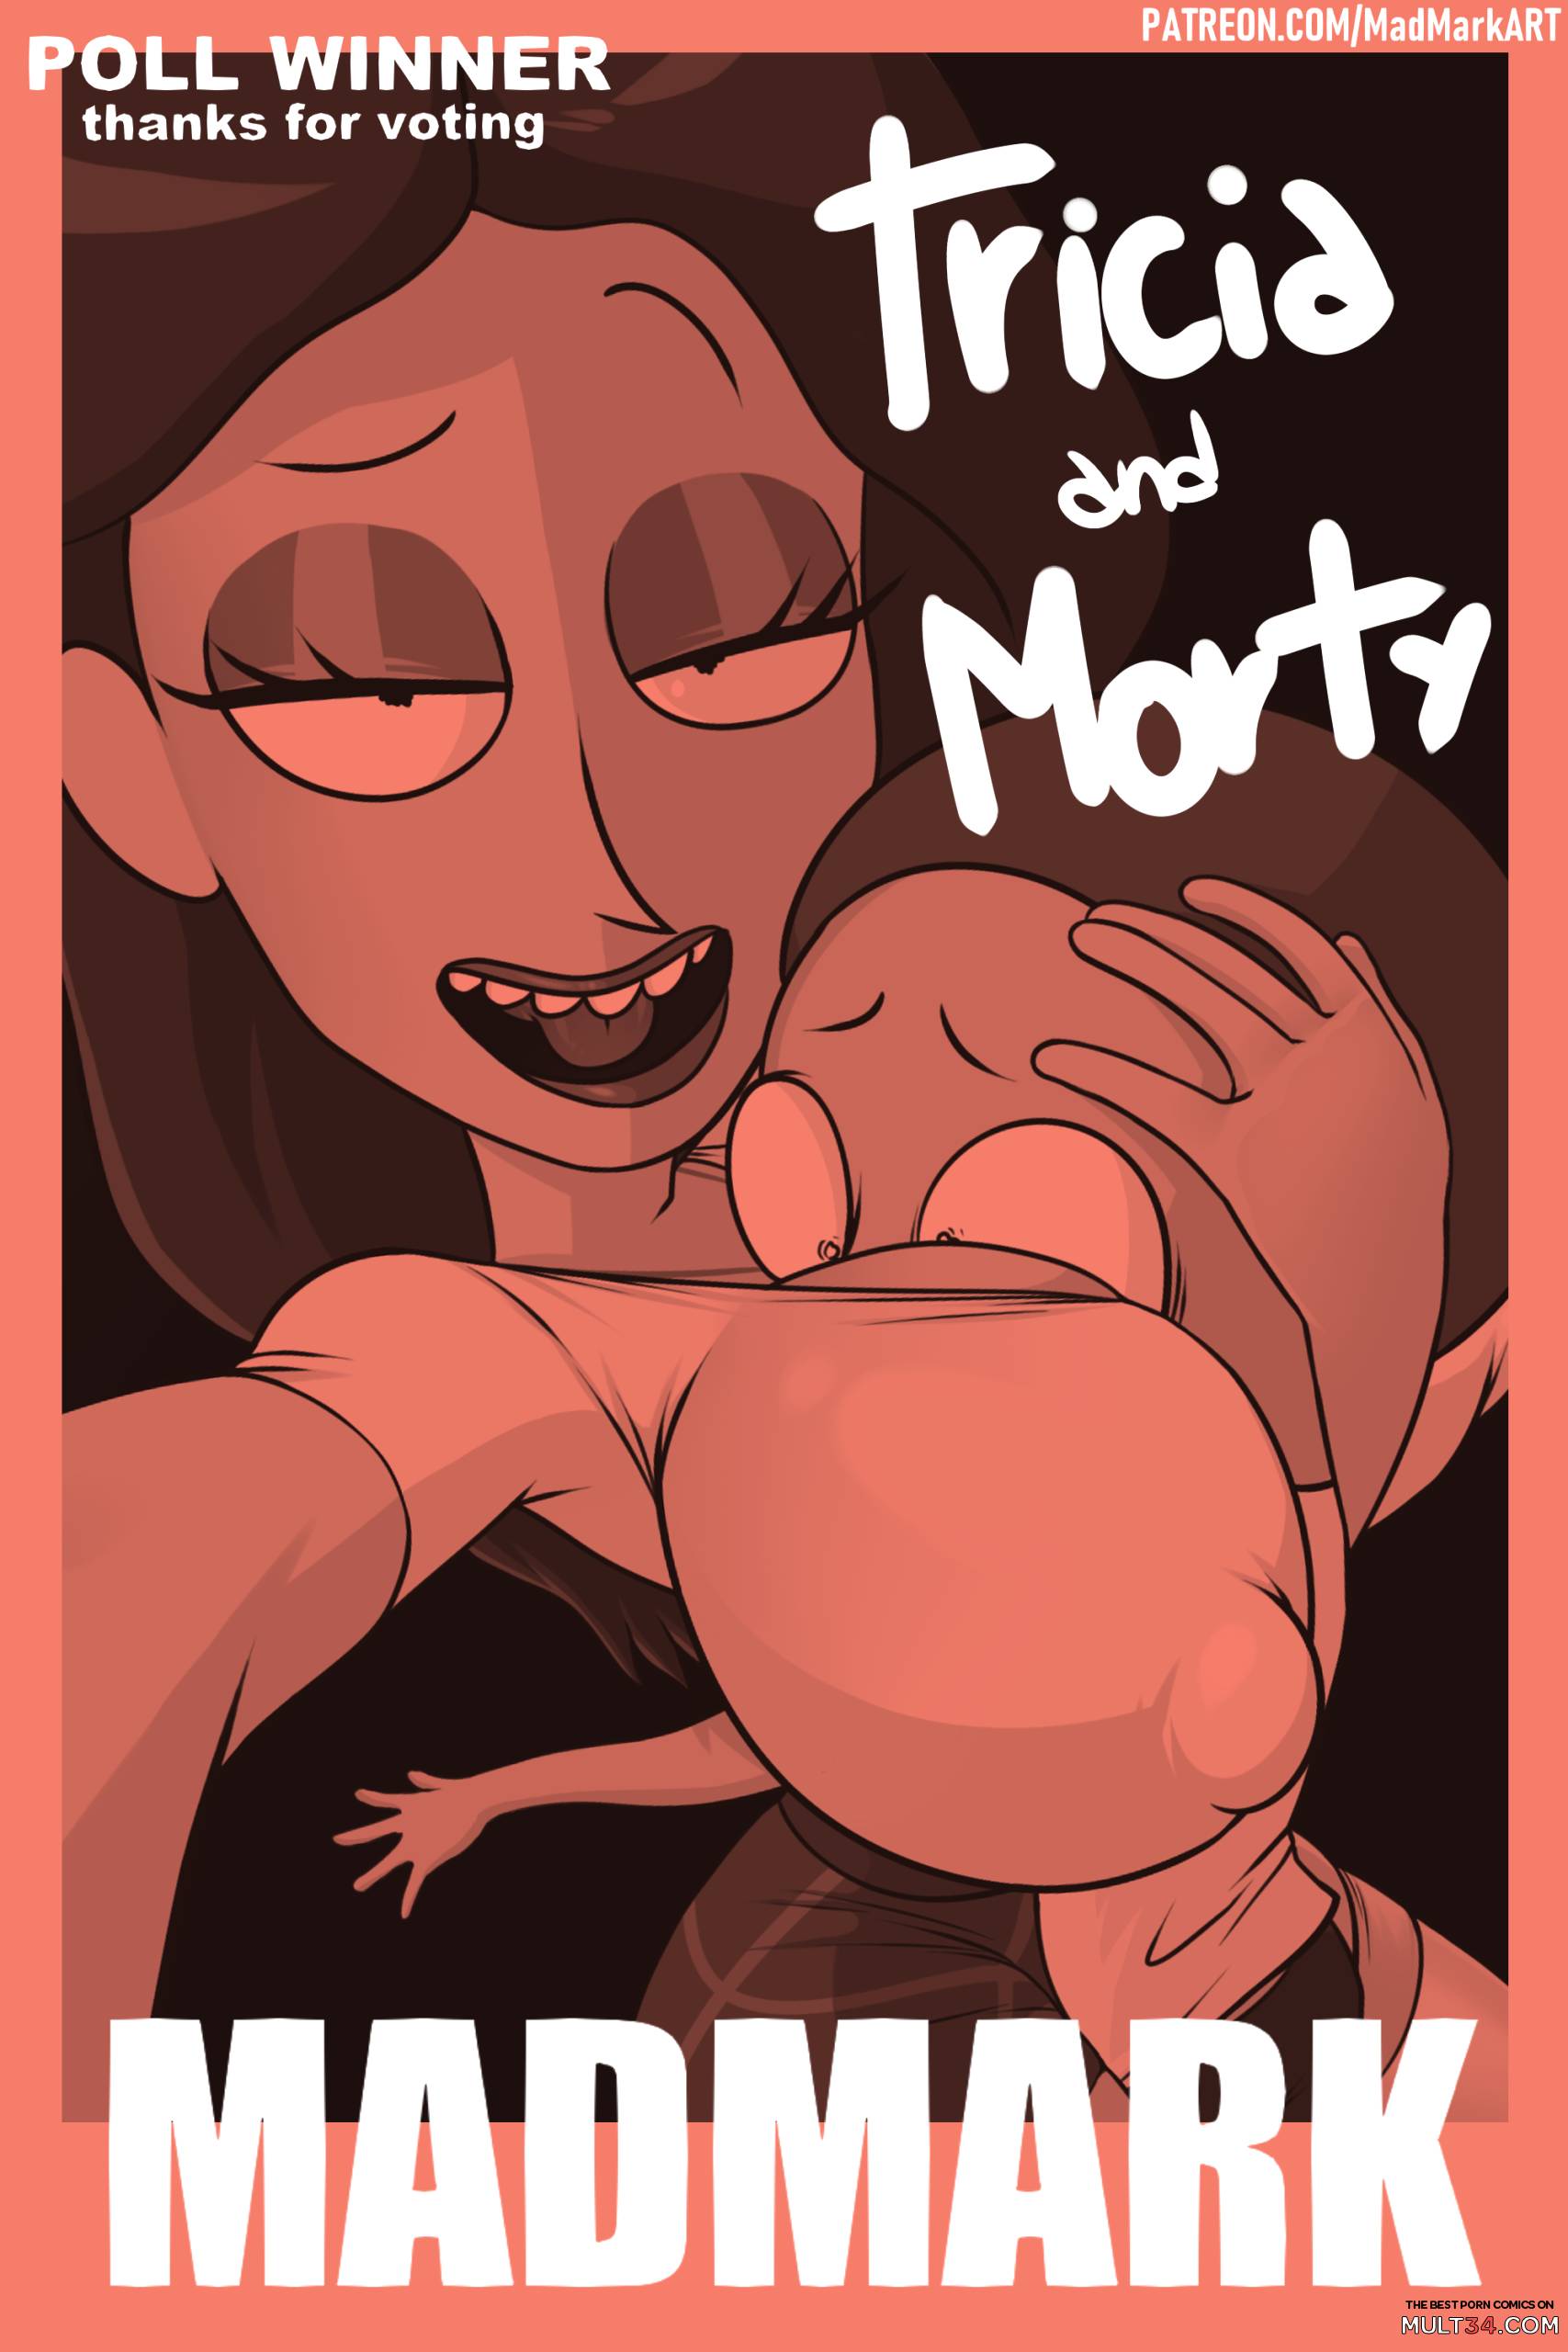 Tricia and Morty page 1